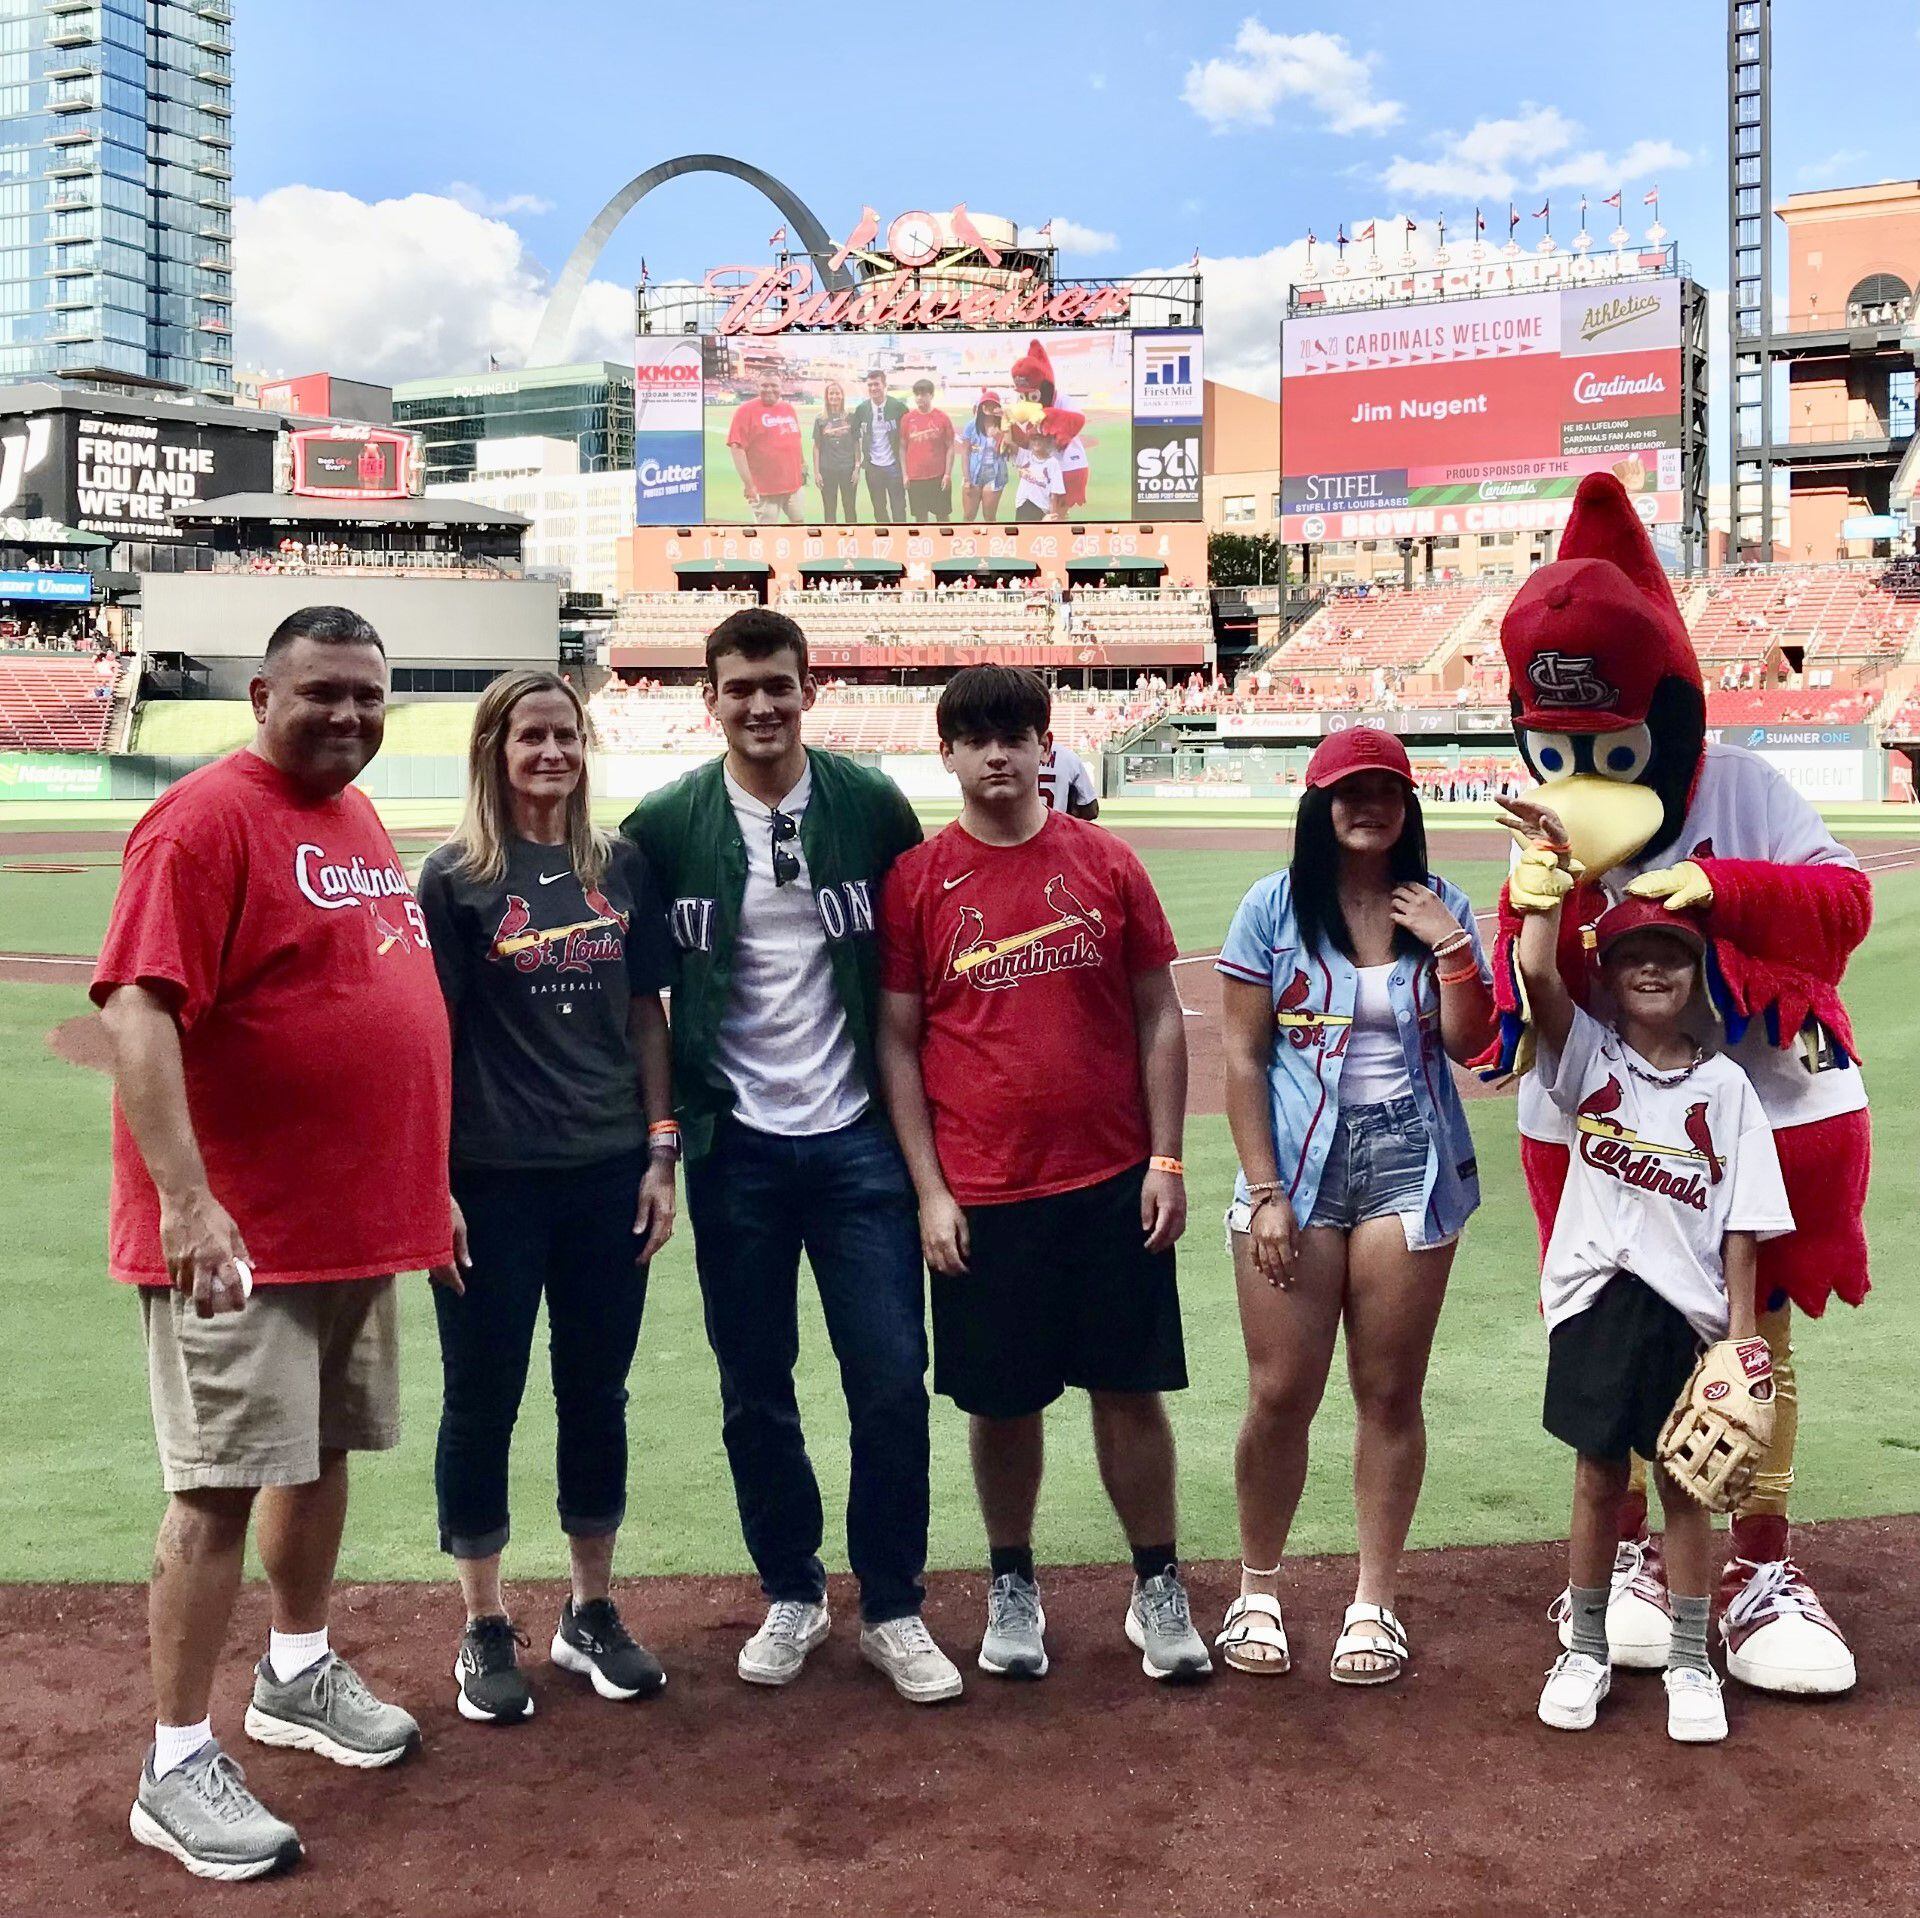 Cardinals' Fredbird not elected to Mascot Hall of Fame